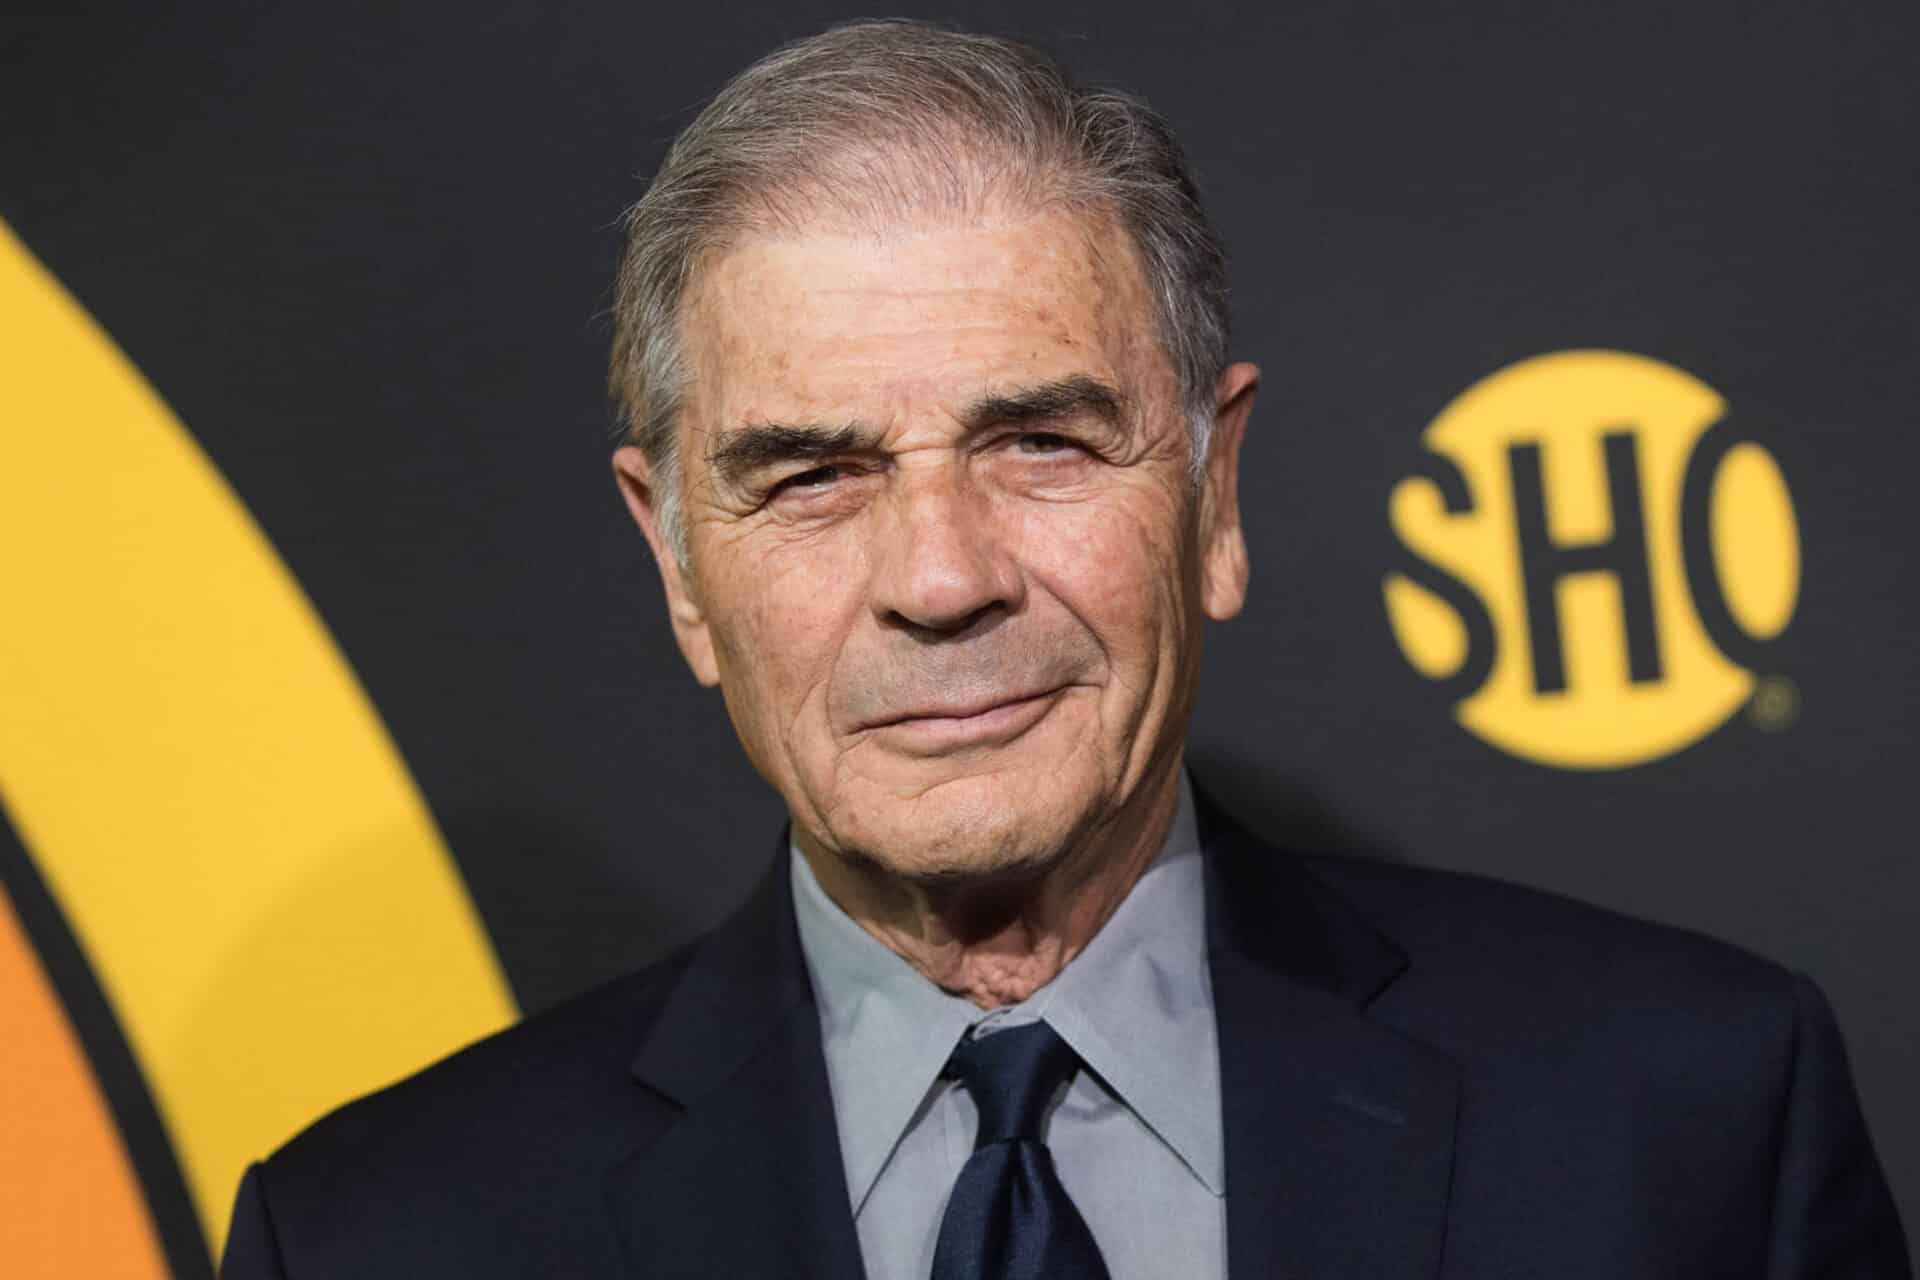 Addio a Robert Forster, star di Jackie Brown e Breaking Bad